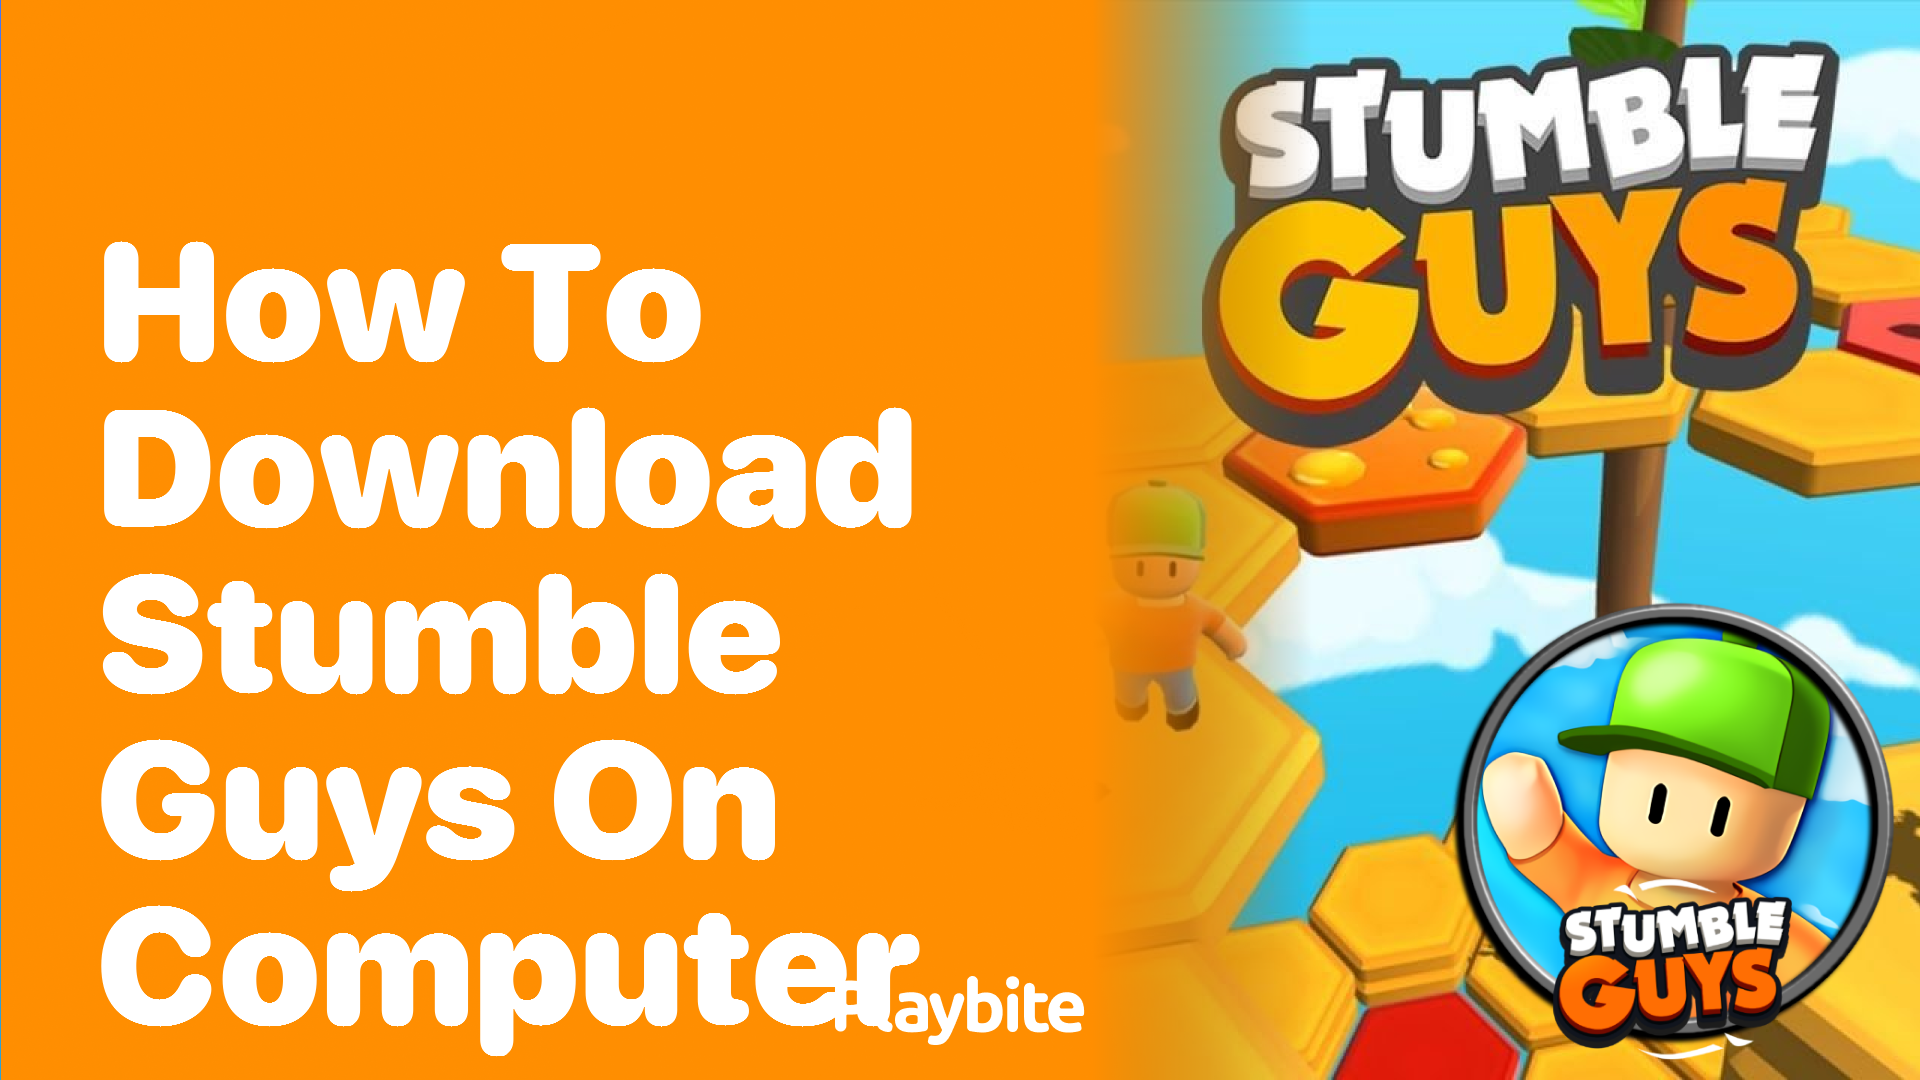 How to Download Stumble Guys on Computer